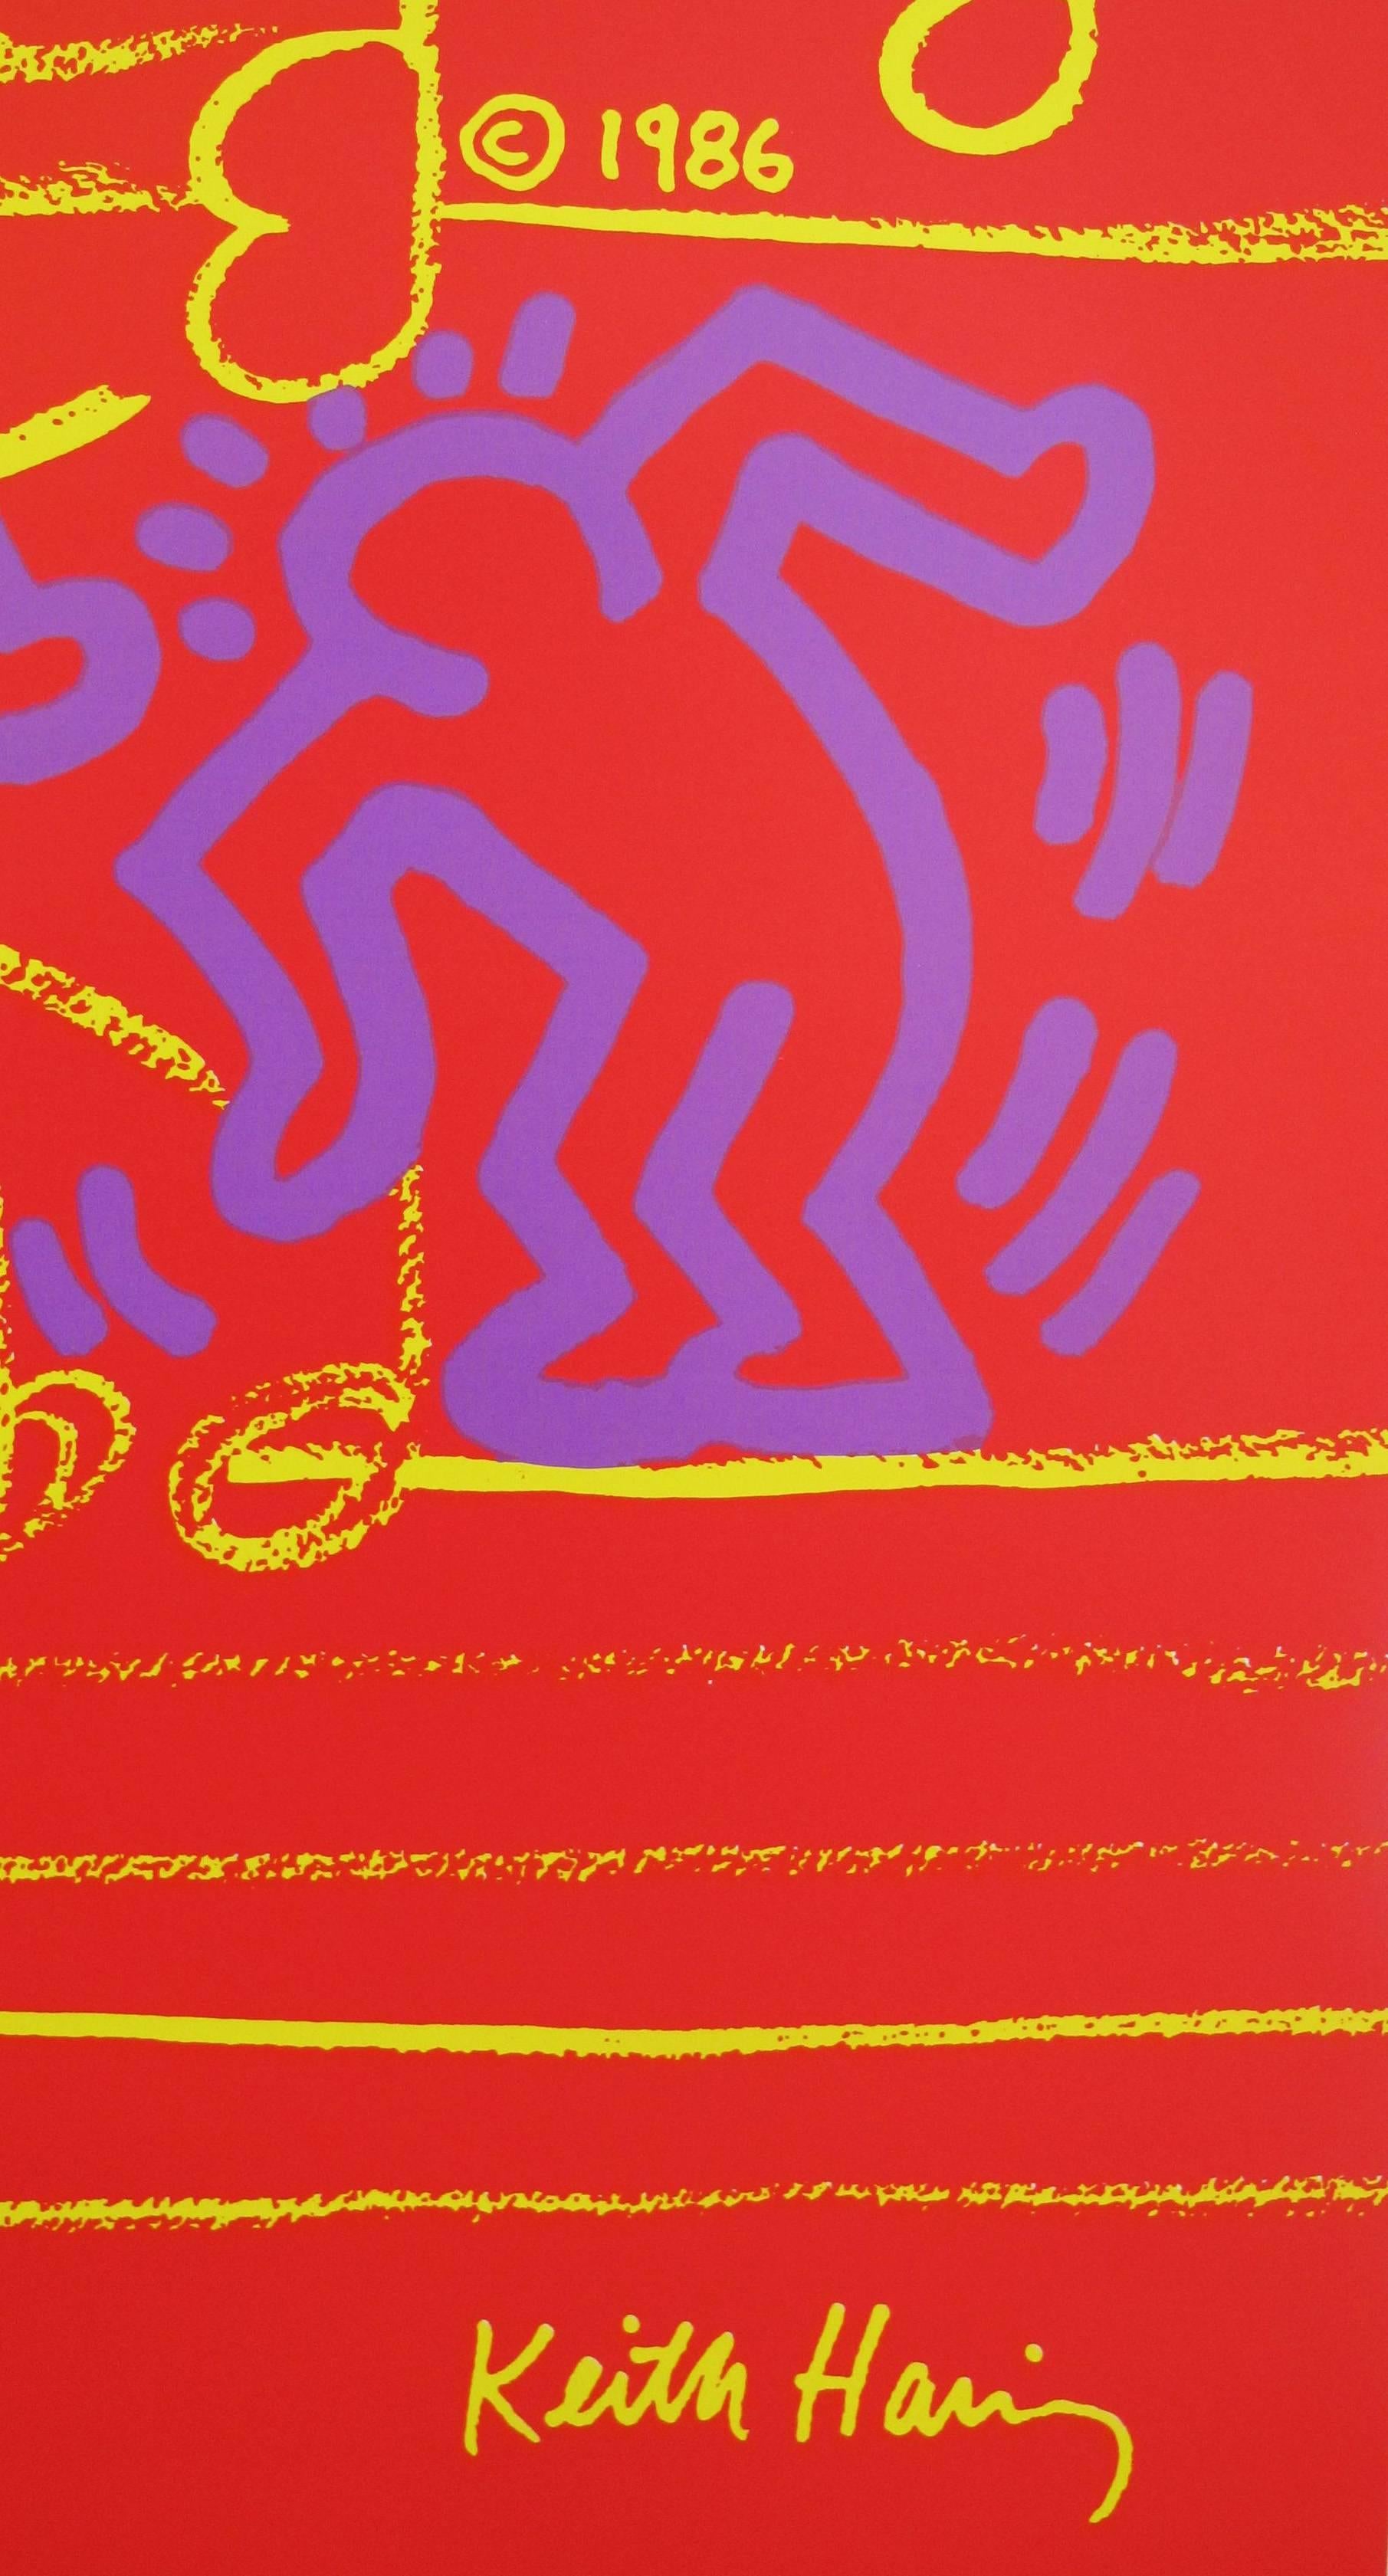 Andy Warhol, Keith Haring Montreux Jazz poster 1986 1